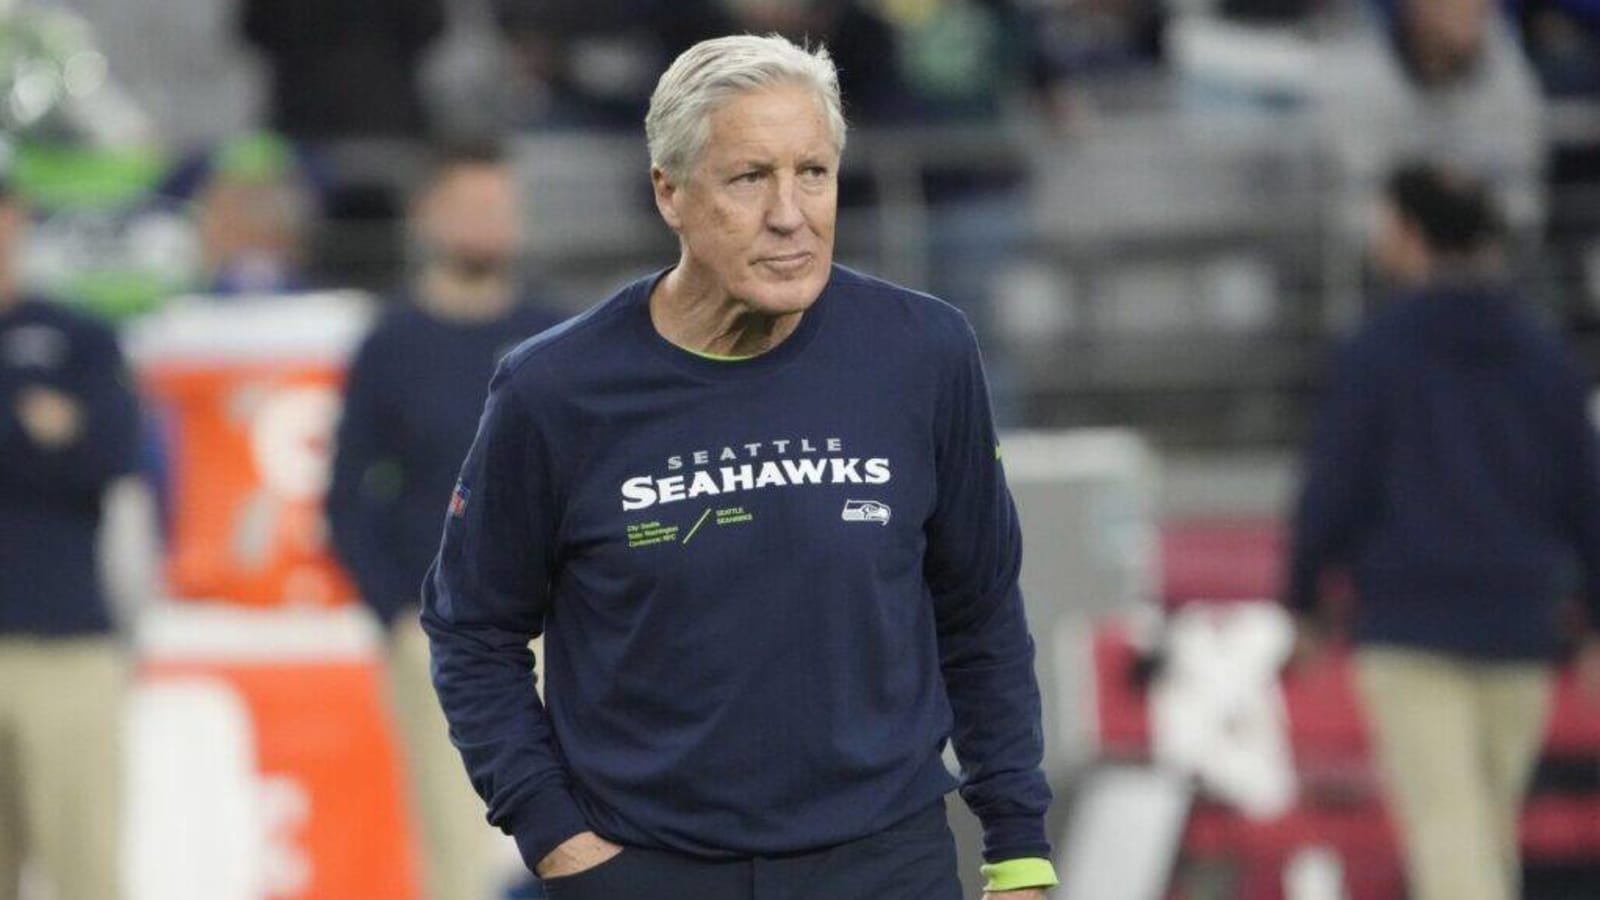 Pete Carroll not fully done coaching? Best team fits